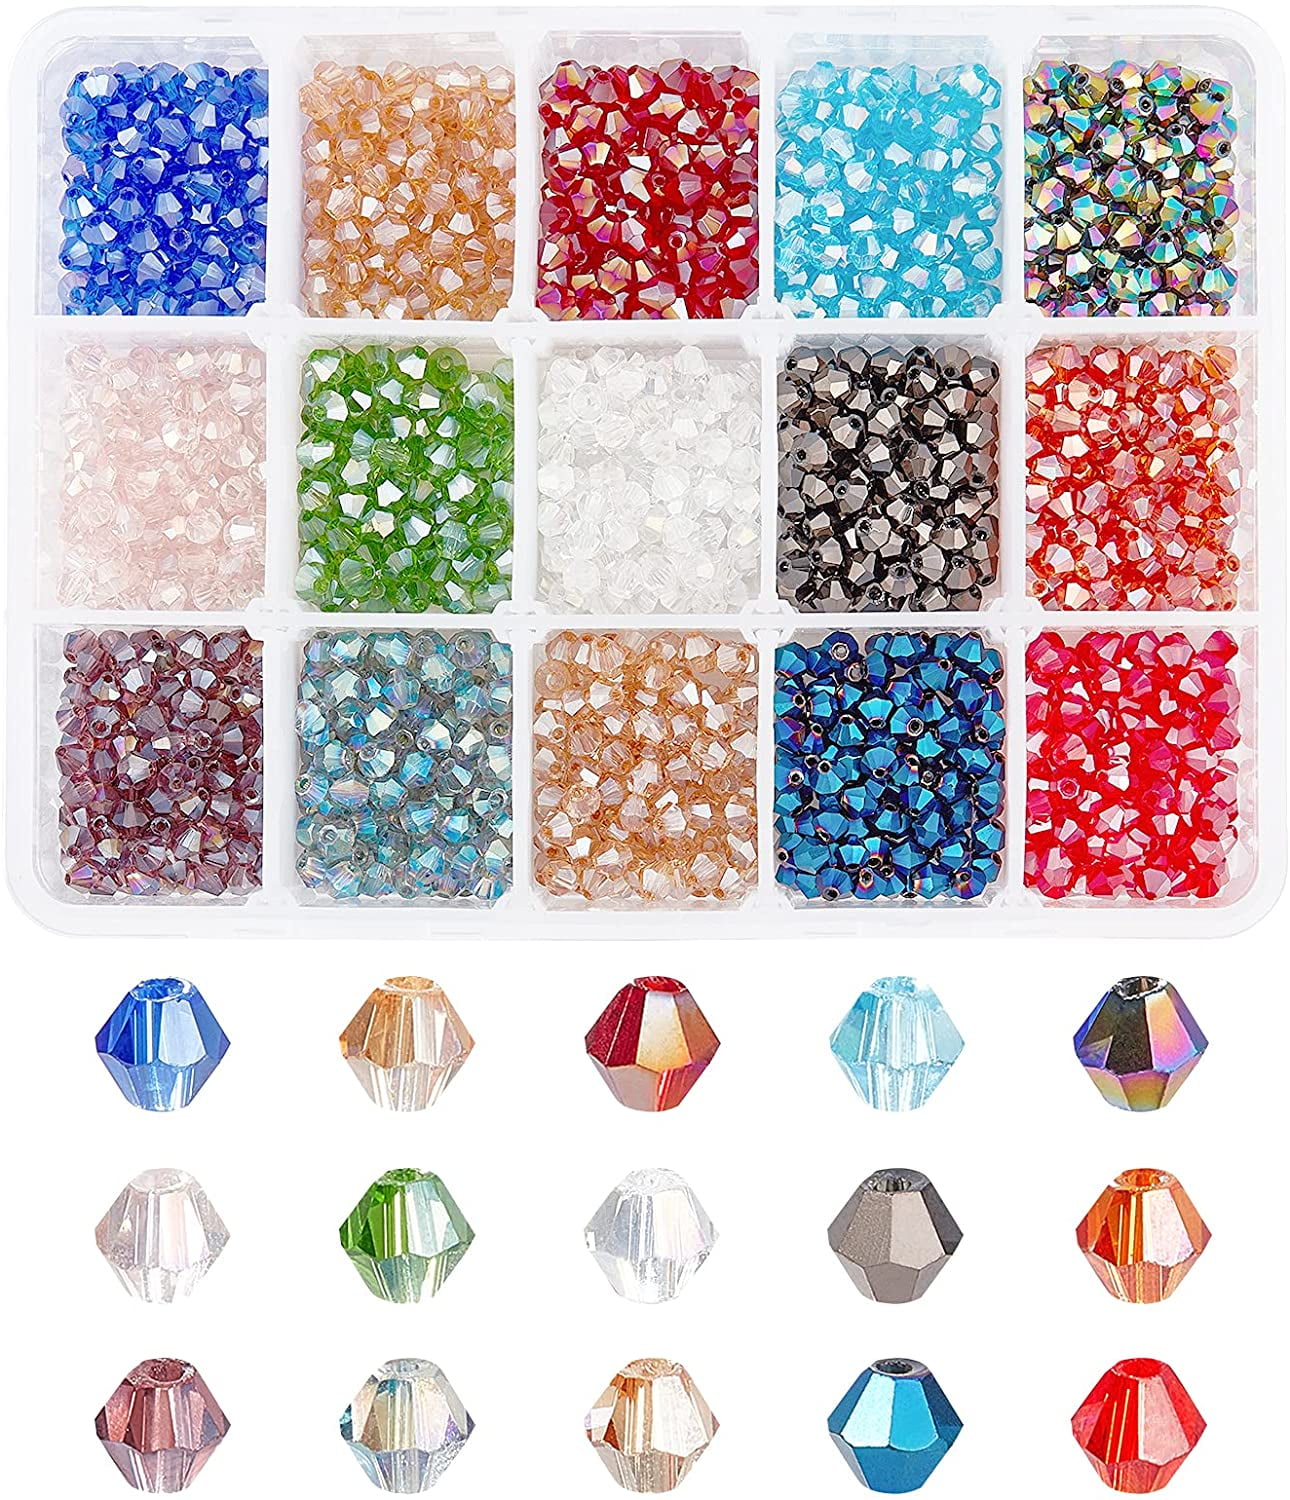 4mm Crystal clear czech glass rondelle spacer beads - approx. 130pc –  MayaHoney beads